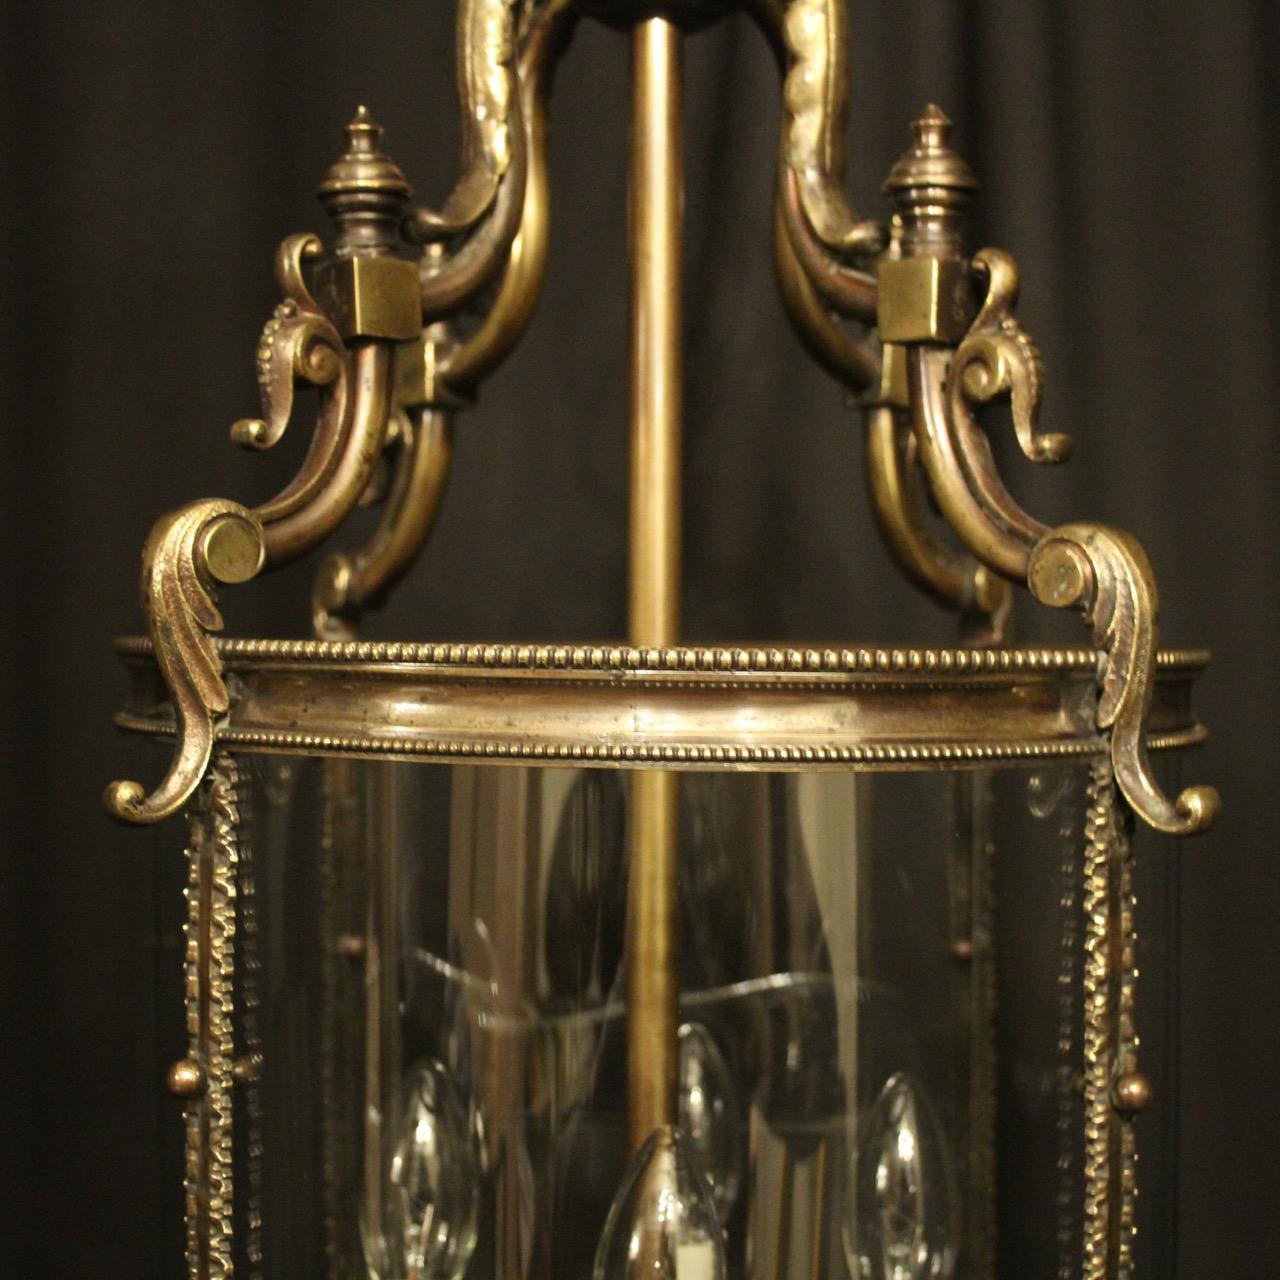 A large English cast bronze four-light antique hall lantern, the four arms with millgrain candle sconces, surrounded by four sectional circular convex glass panels and held within a scrolling framework with side imbricated leaf panels and open